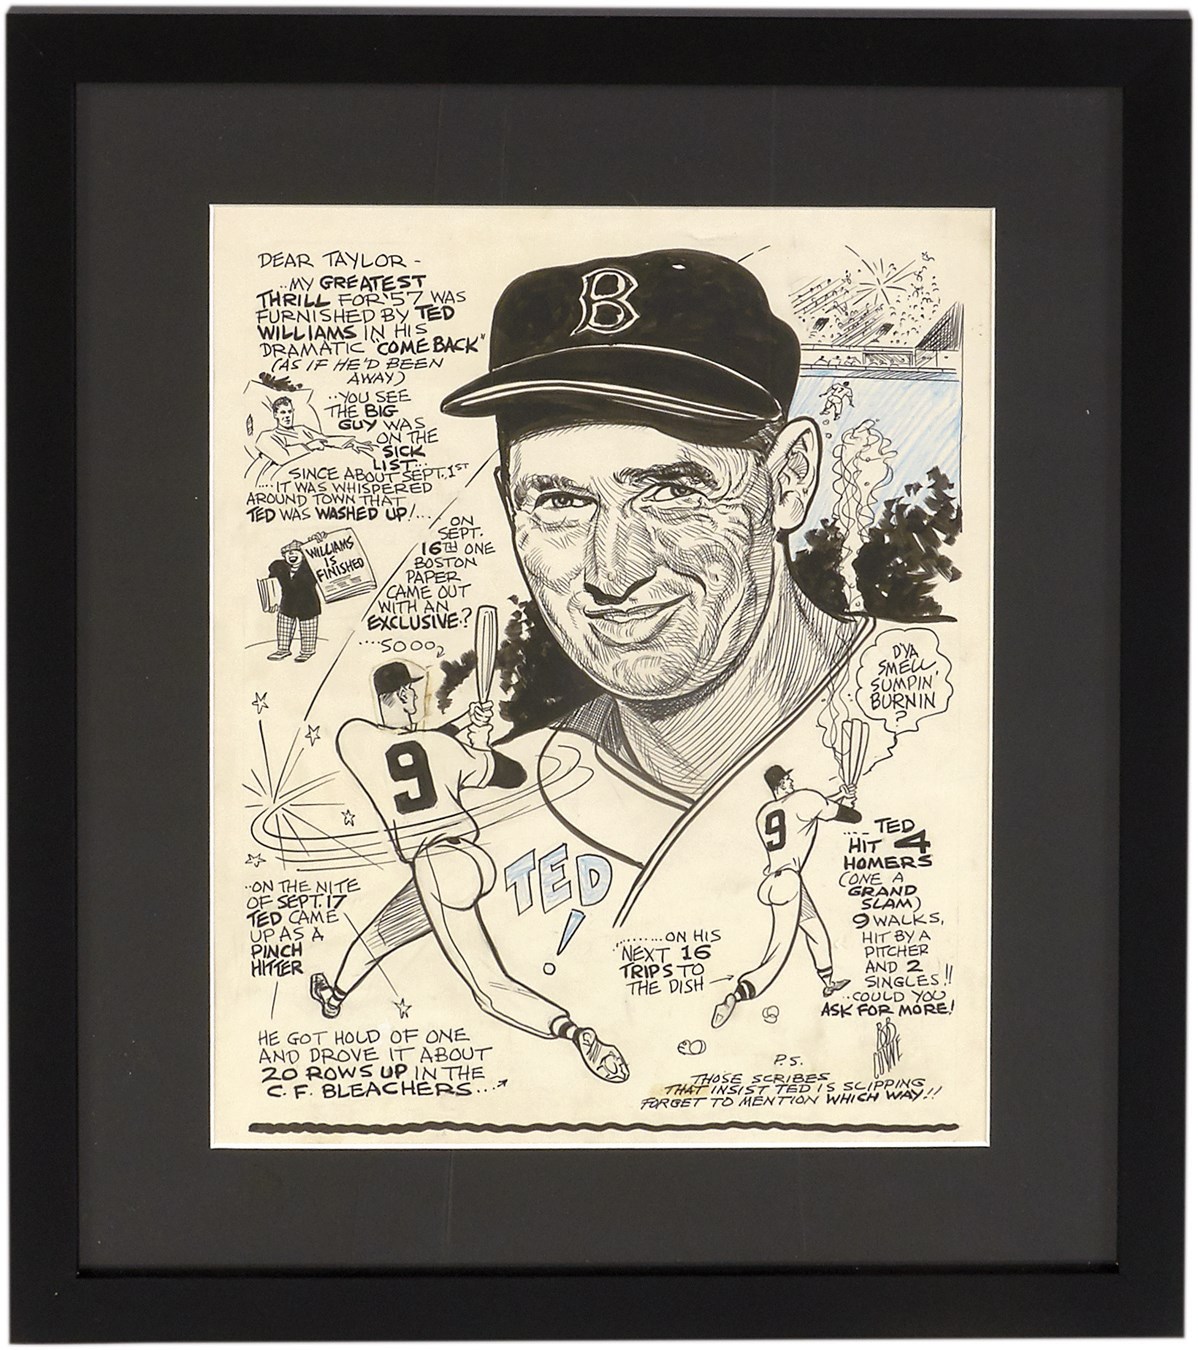 - 1957 Ted Williams Comeback Original Art by Bob Coyne - Published in The Sporting News